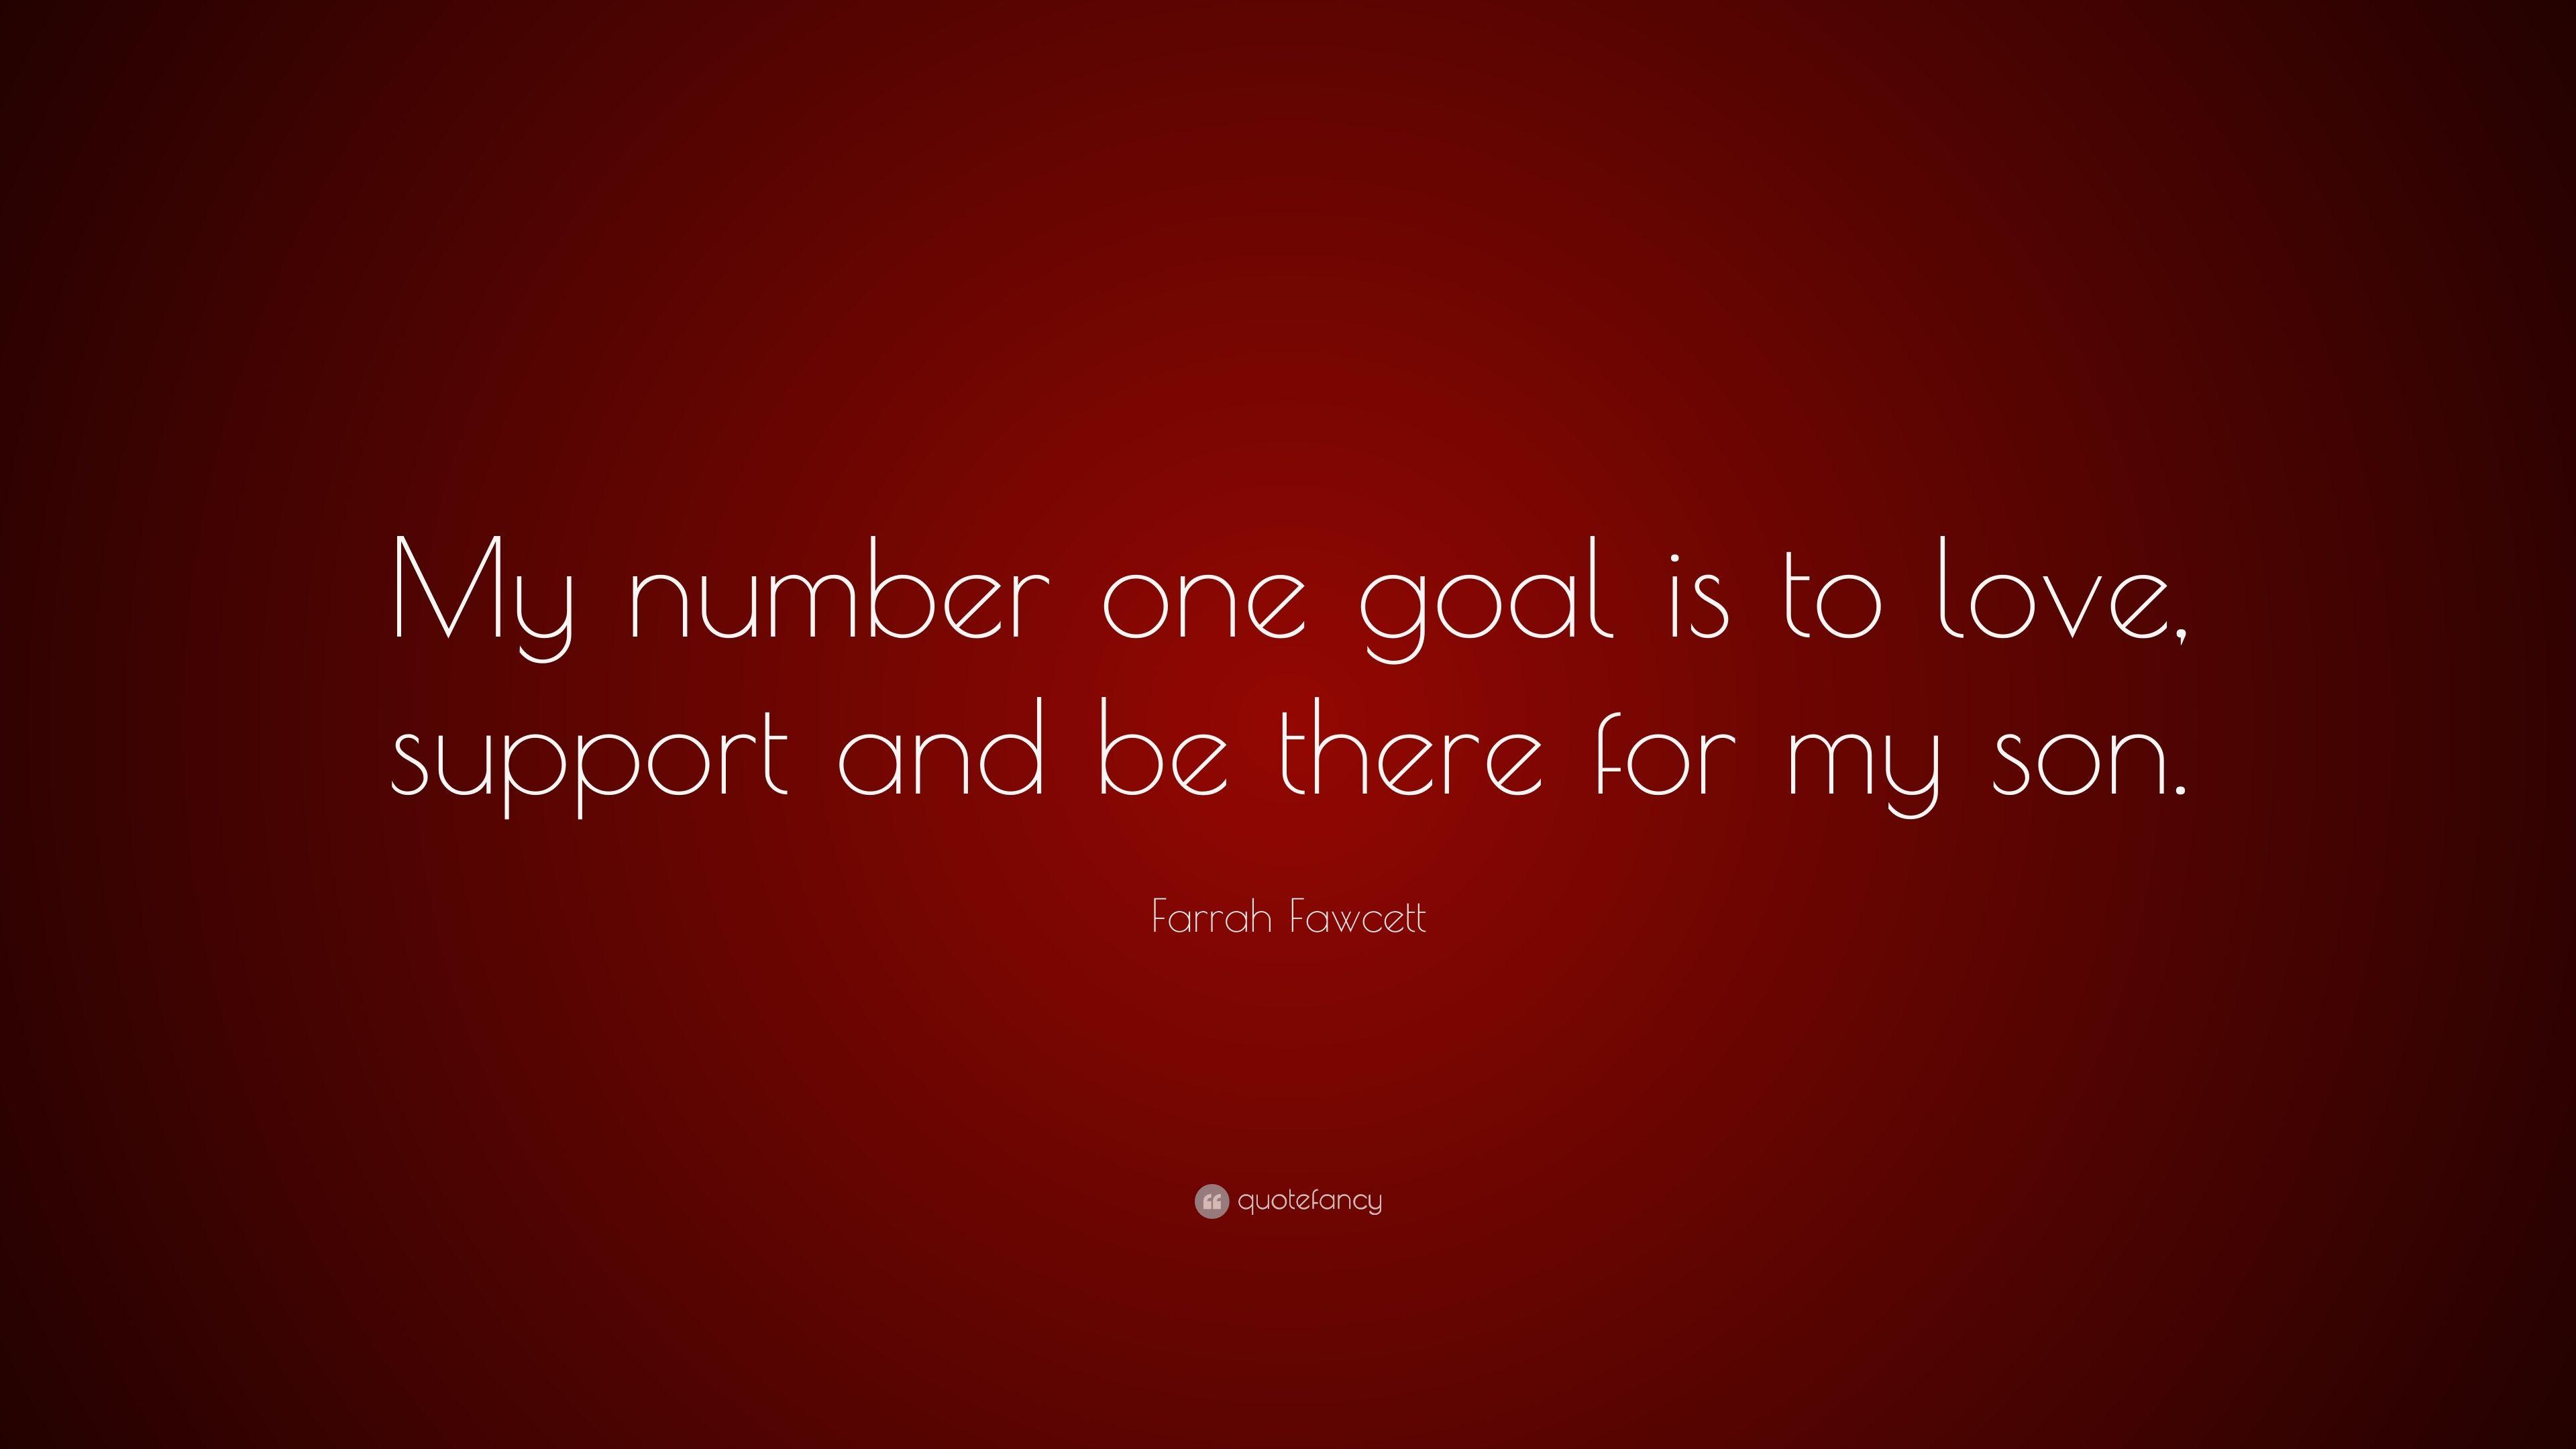 Farrah Fawcett Quote: “My number one goal is to love, support and be